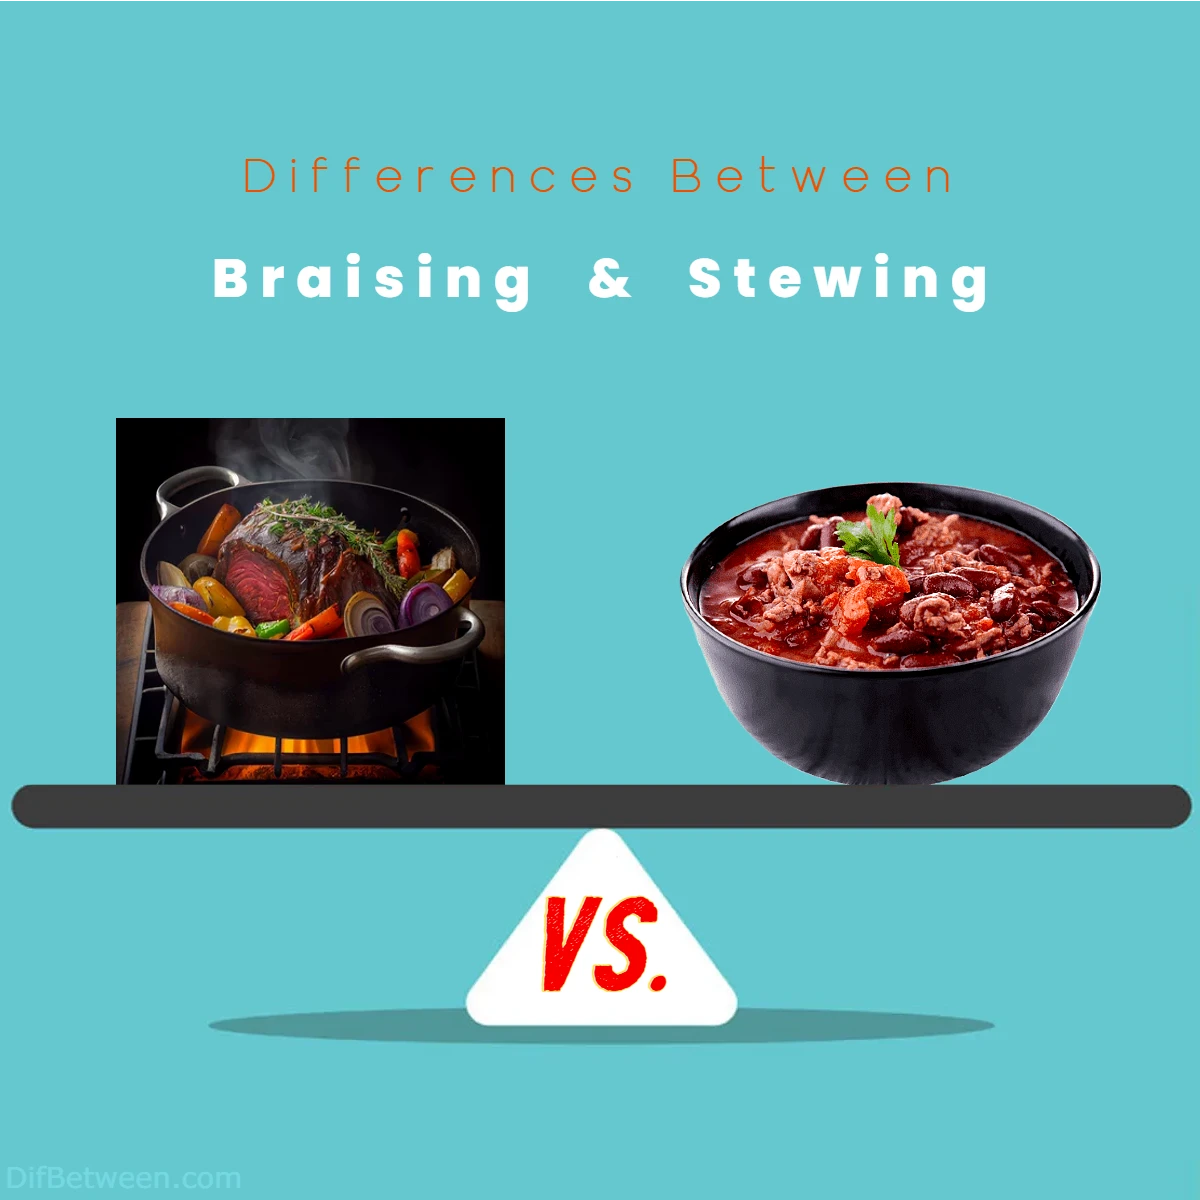 Differences Between Braising vs Stewing